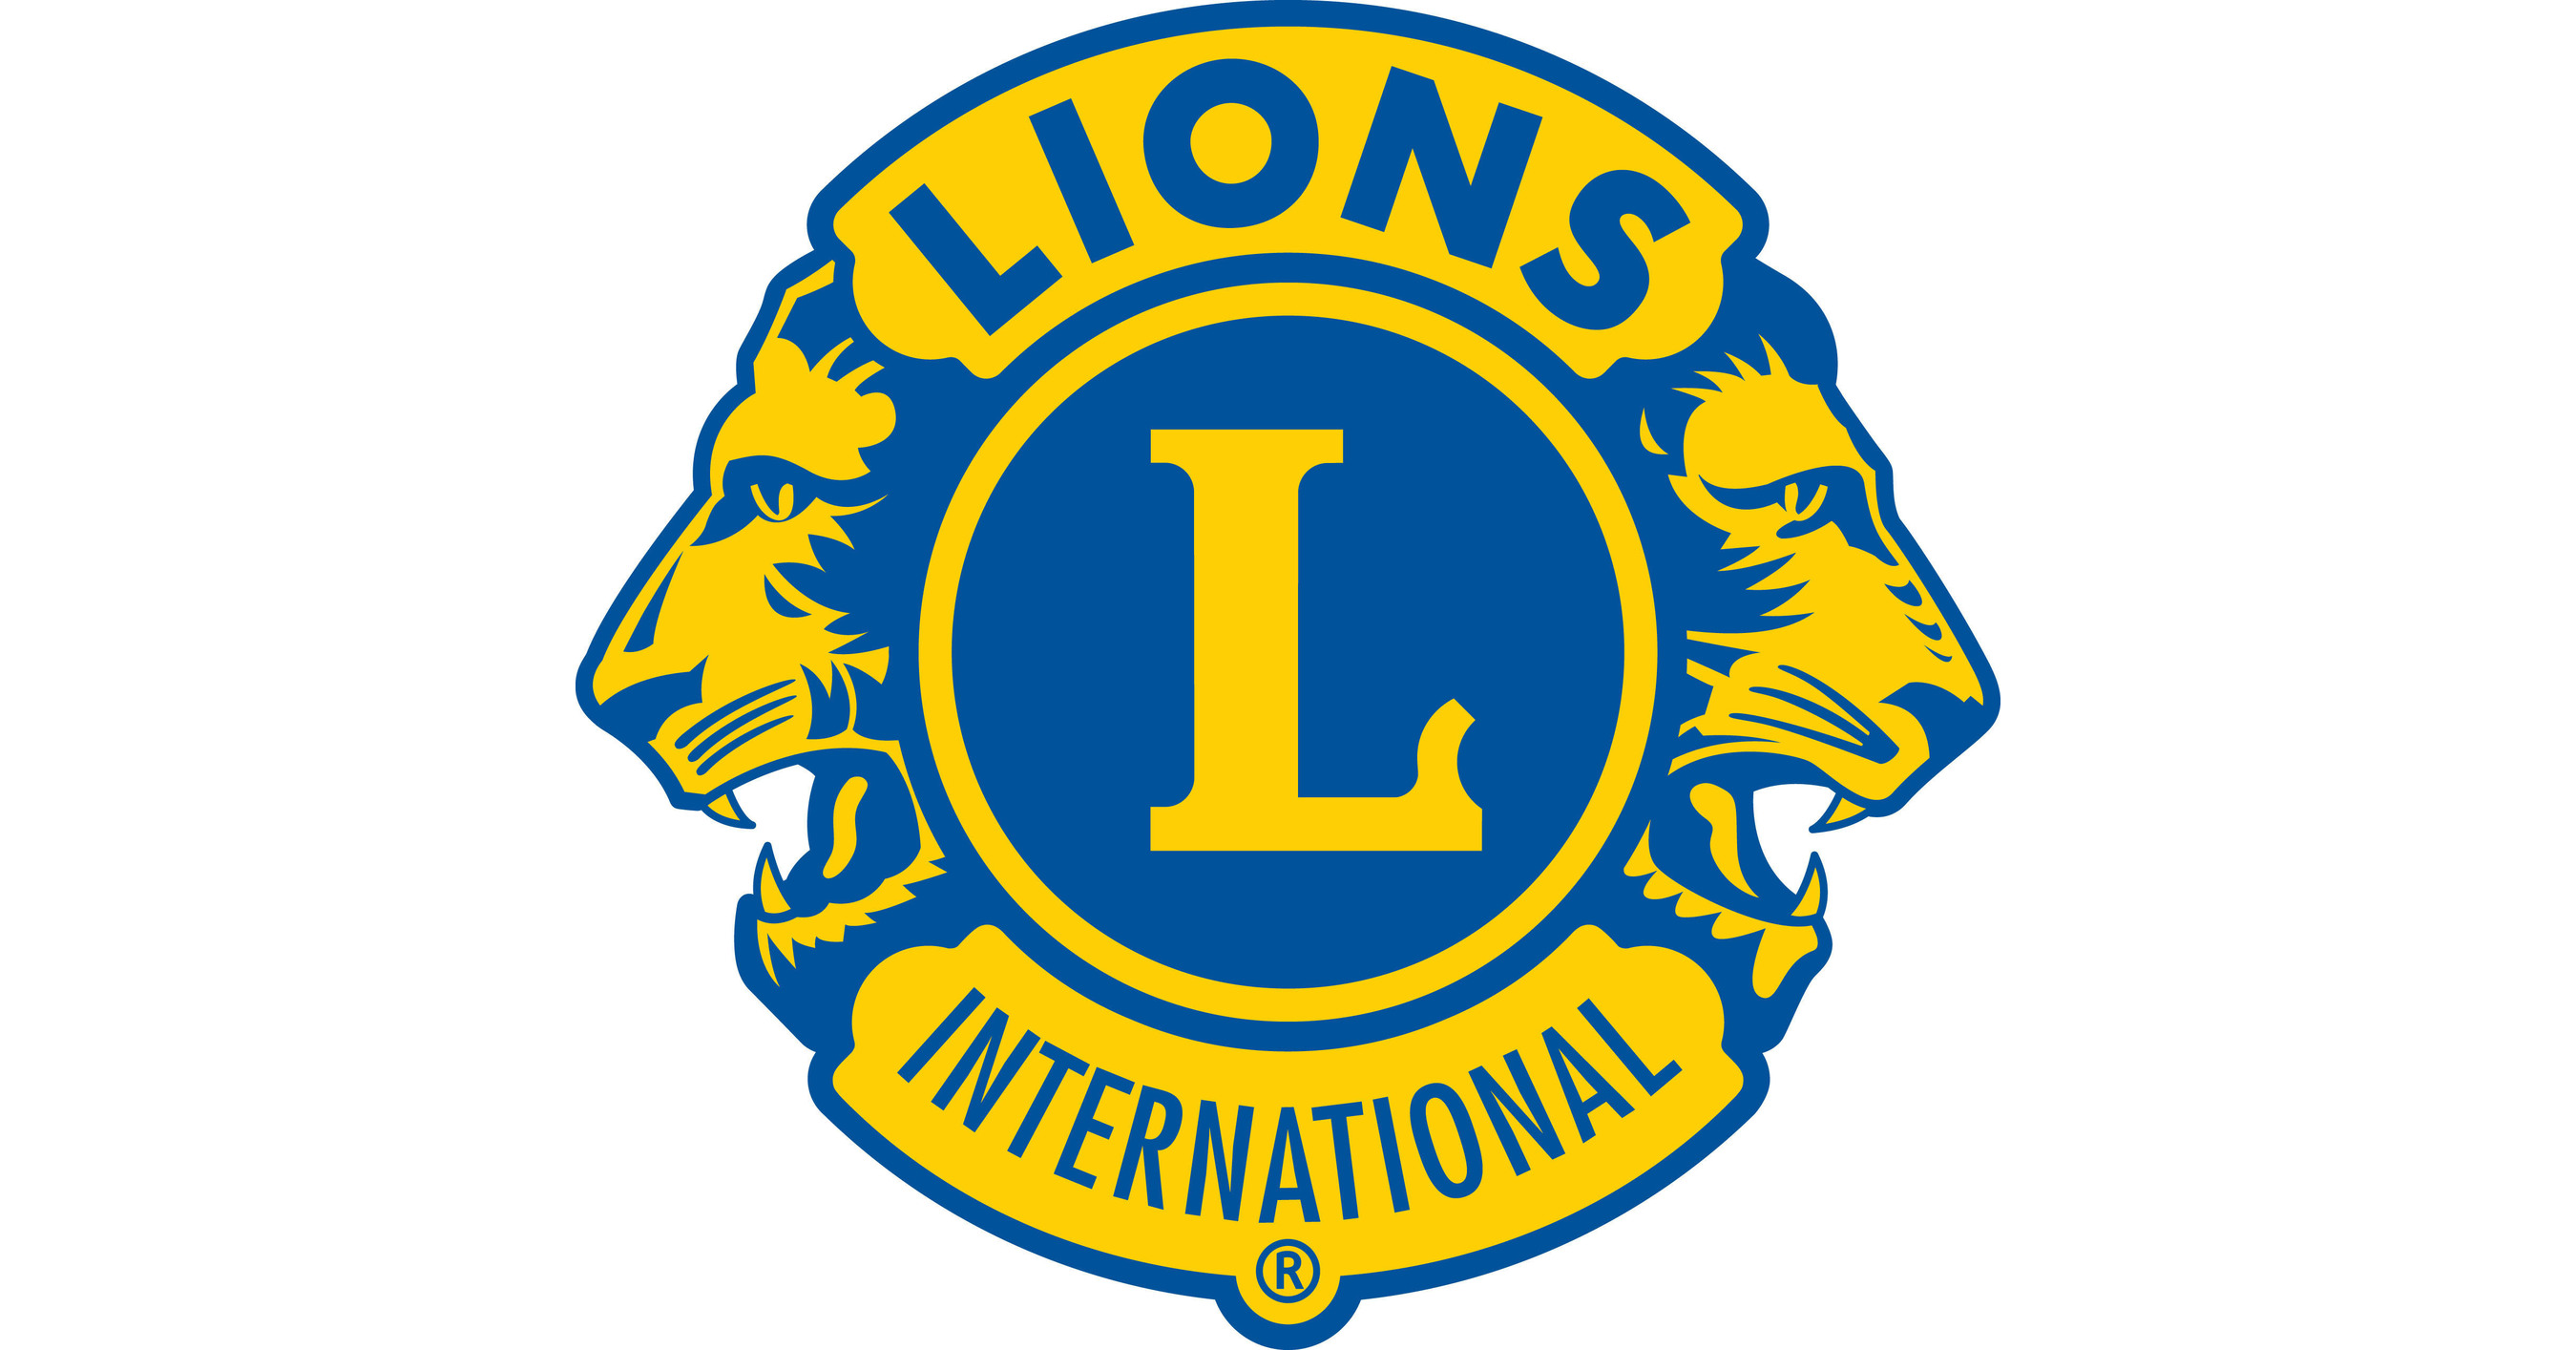 Lions celebrate a successful year of service at the 106th International Lions Convention